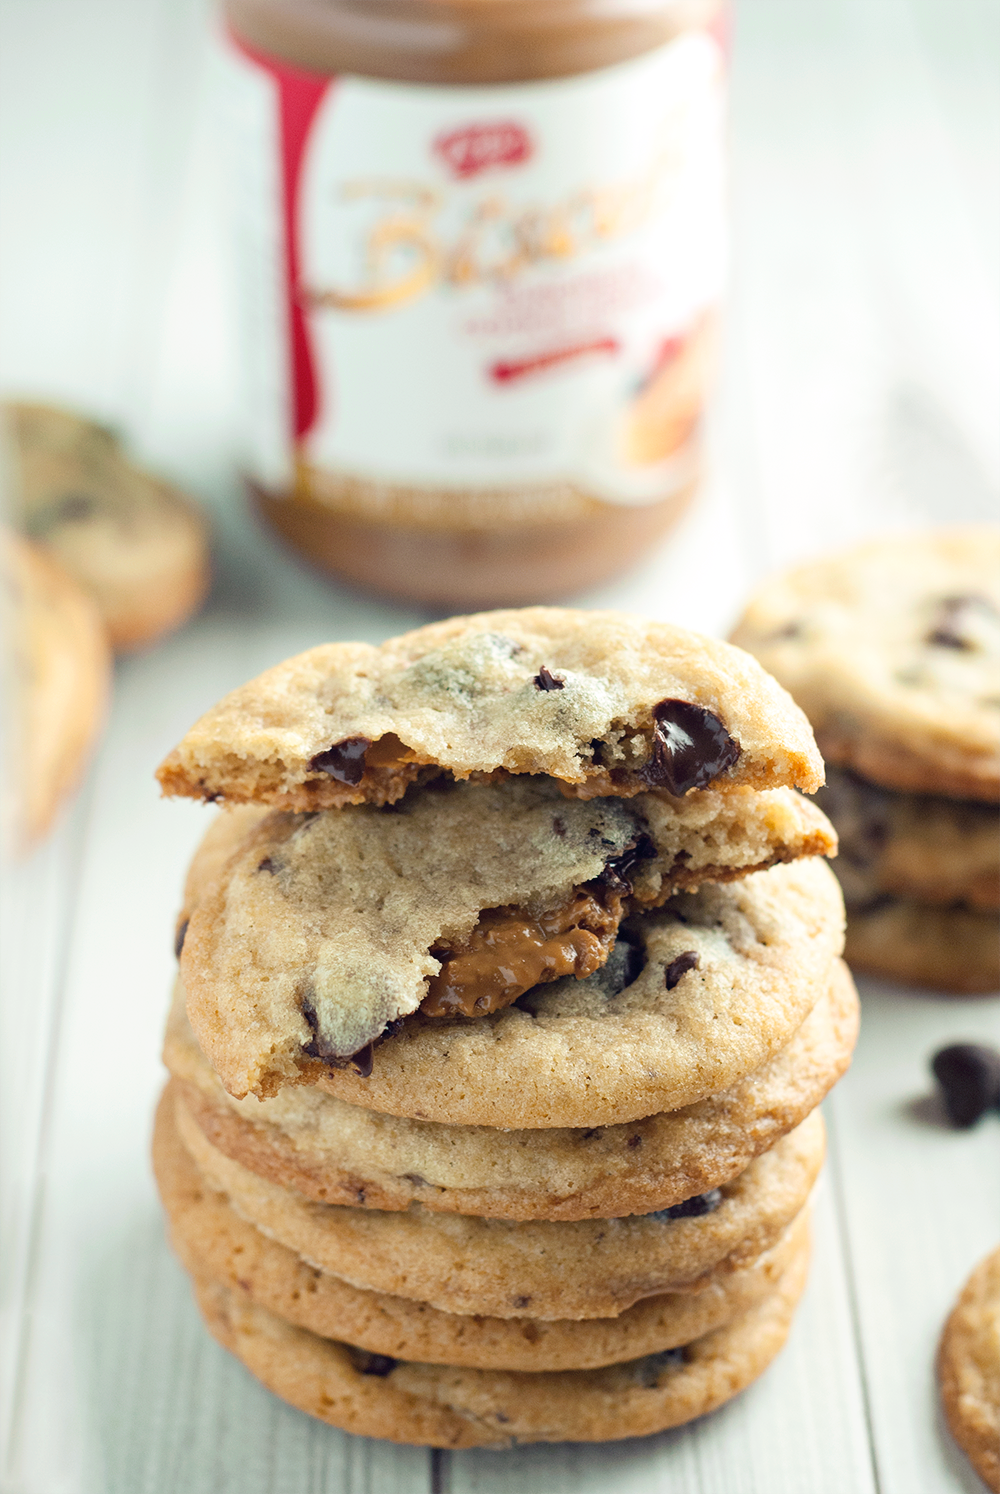 These cookie butter stuffed chocolate chip cookies are the real deal of delicious! Get the recipe and try today!